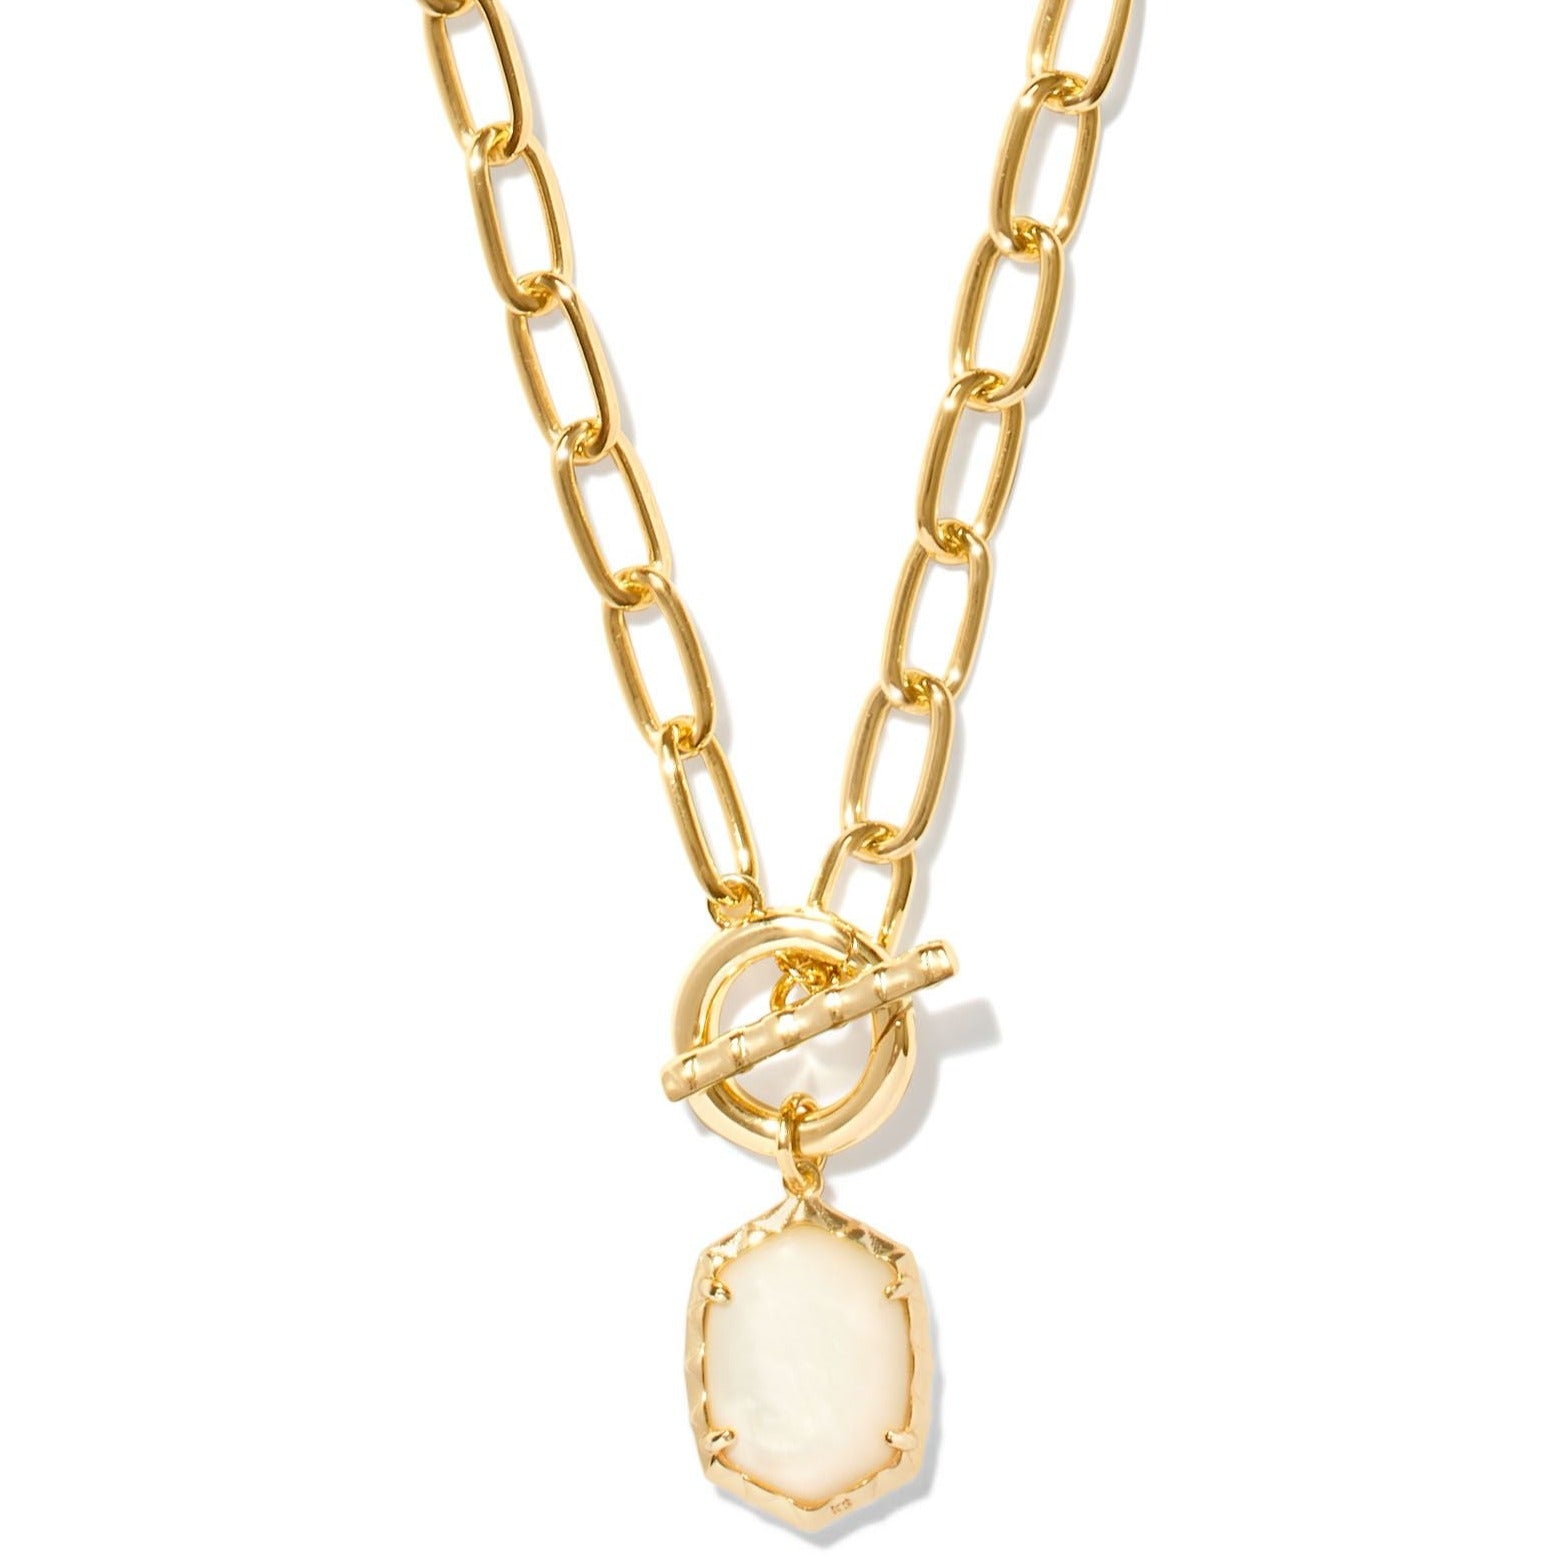 Kendra Scott | Daphne Gold Link and Chain Necklace in Ivory Mother of Pearl - Giddy Up Glamour Boutique